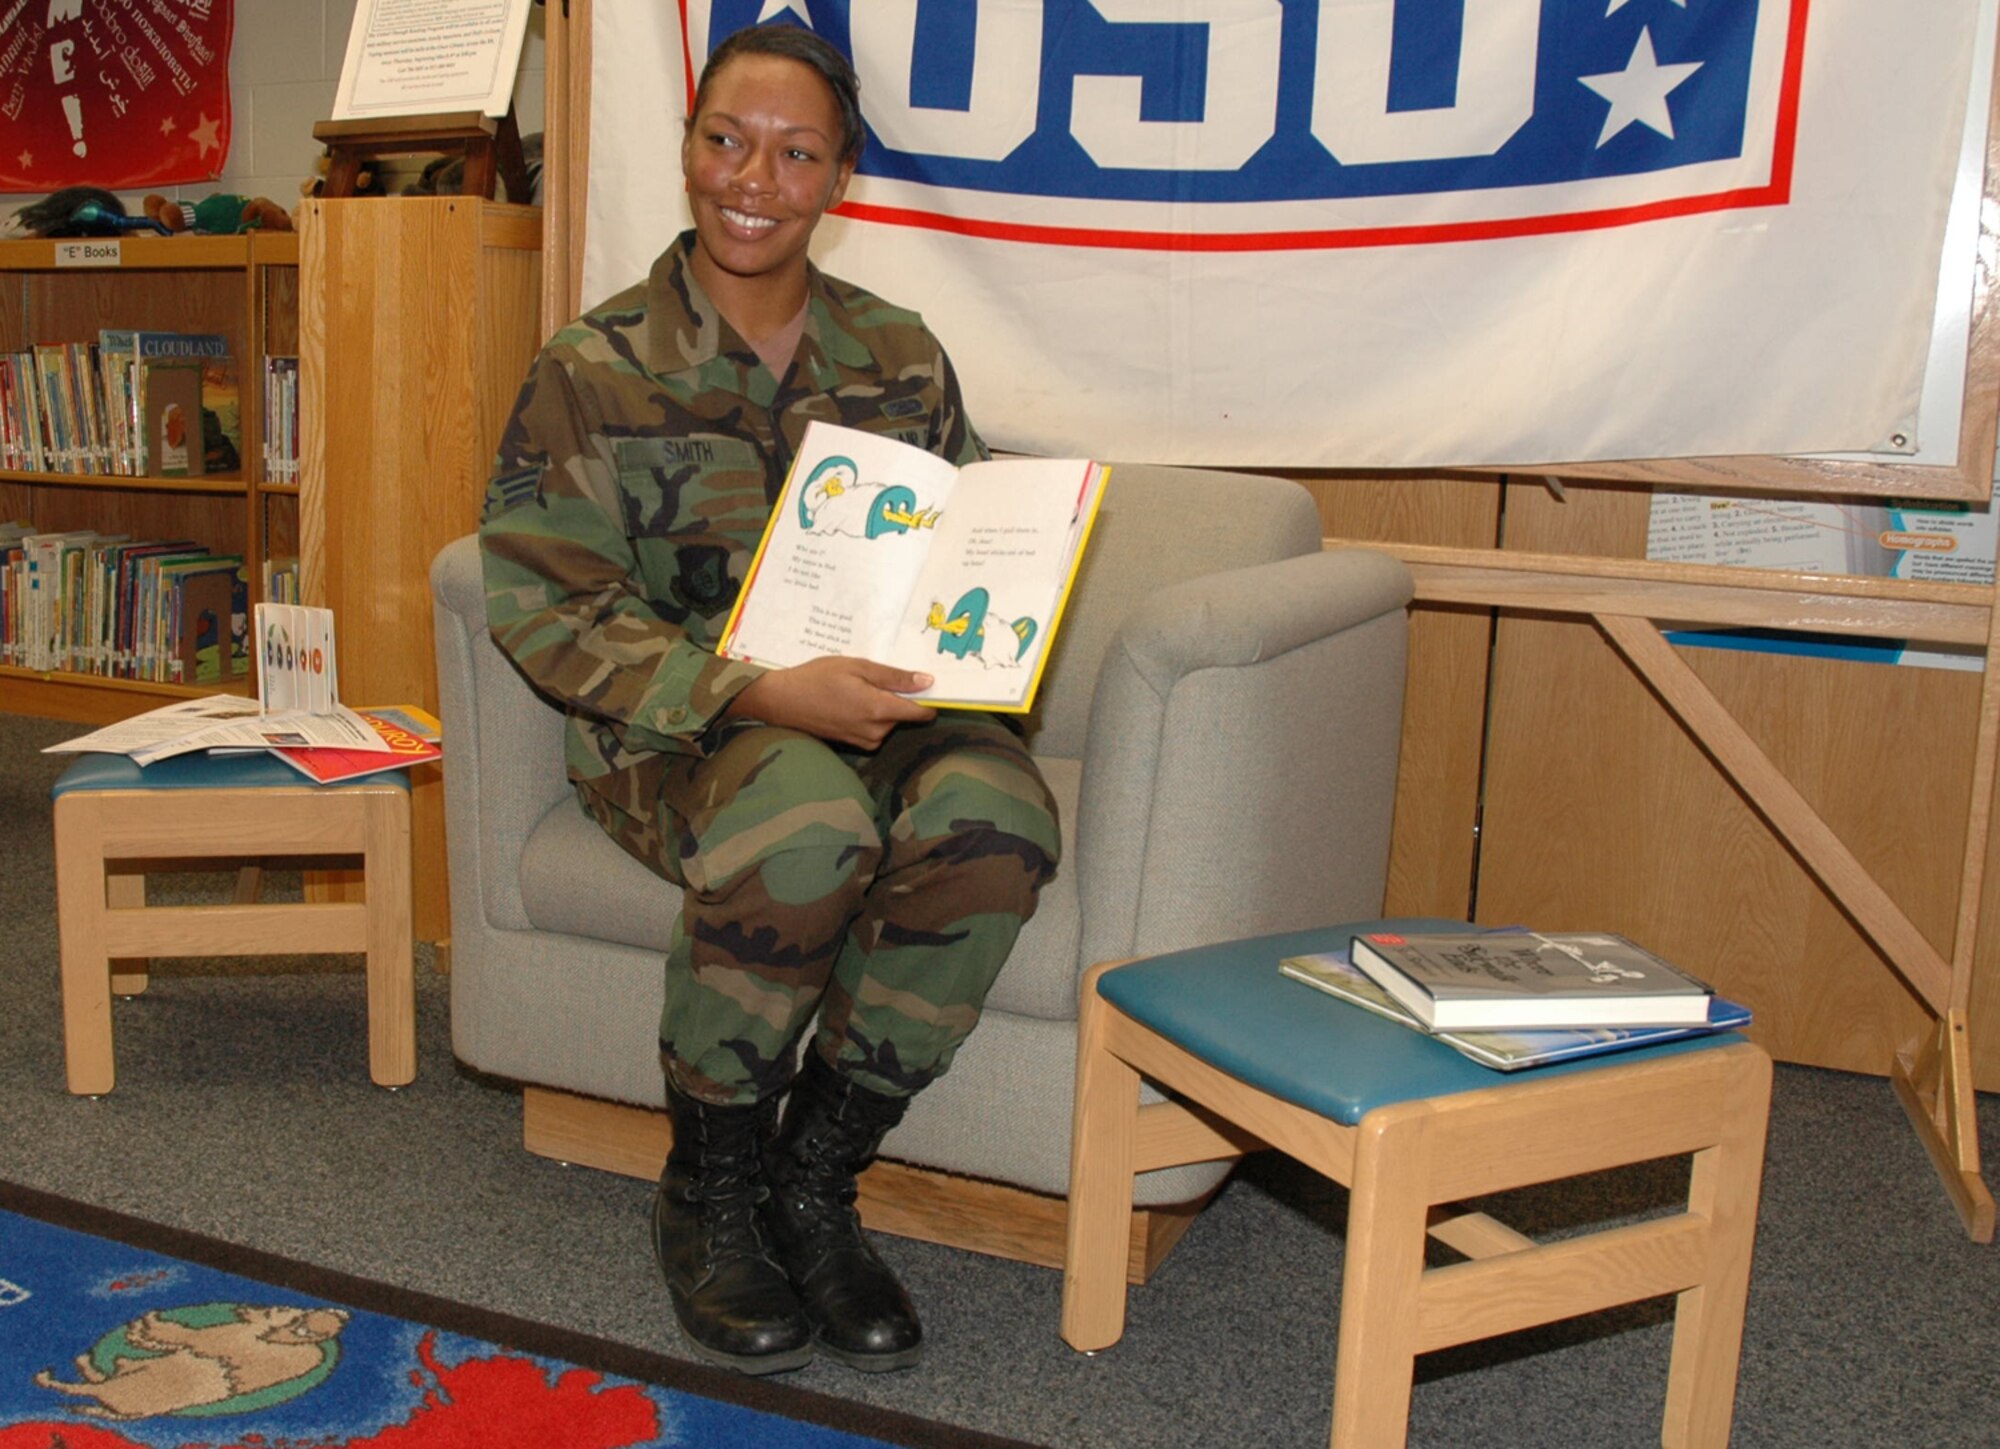 OSAN AIR BASE, Republic of Korea --  Senior Airman Amayou Smith reads "One Fish, Two Fish, Red Fish, Blue Fish" into the camera as part of the "United Through Reading" program here. United Through Reading is a Family Literacy Foundation and United Services Organization program that allows servicmembers at remote locations to read to their children or young family members on video. Airman Smith is with the 51st Communications Squadron. (U.S. Air Force photo by Staff Sgt. Benjamin Rojek)
